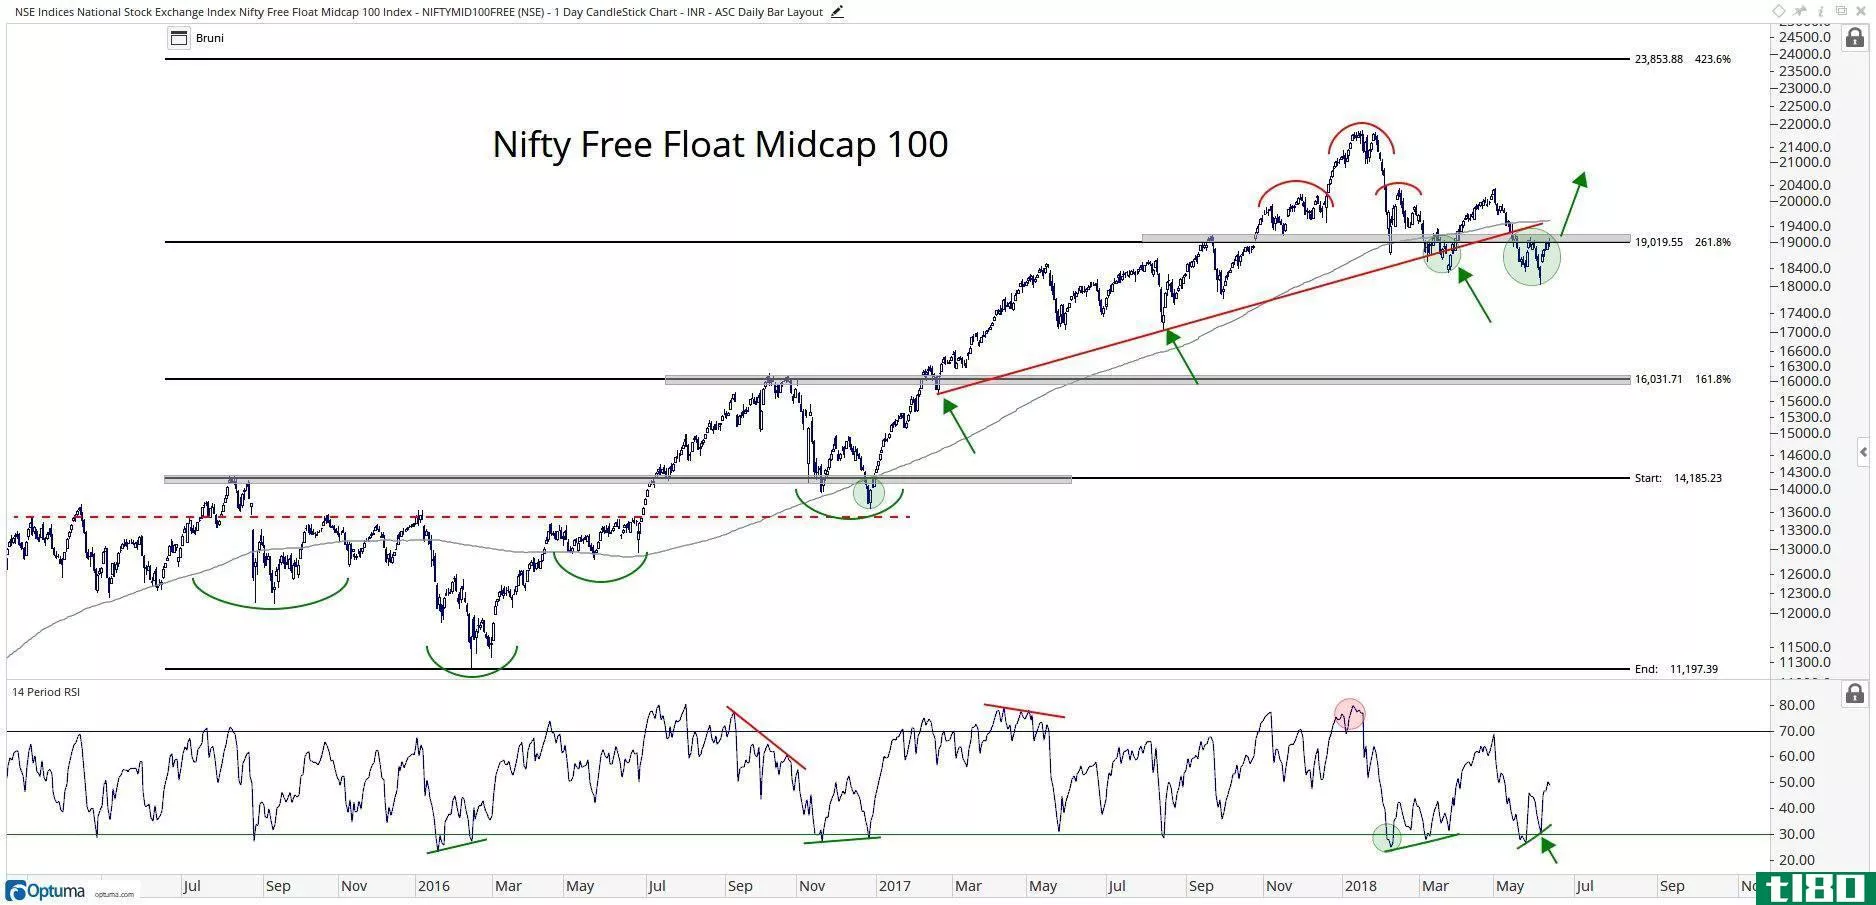 Technical chart showing the performance of the Nifty Free Float Midcap 100 Index